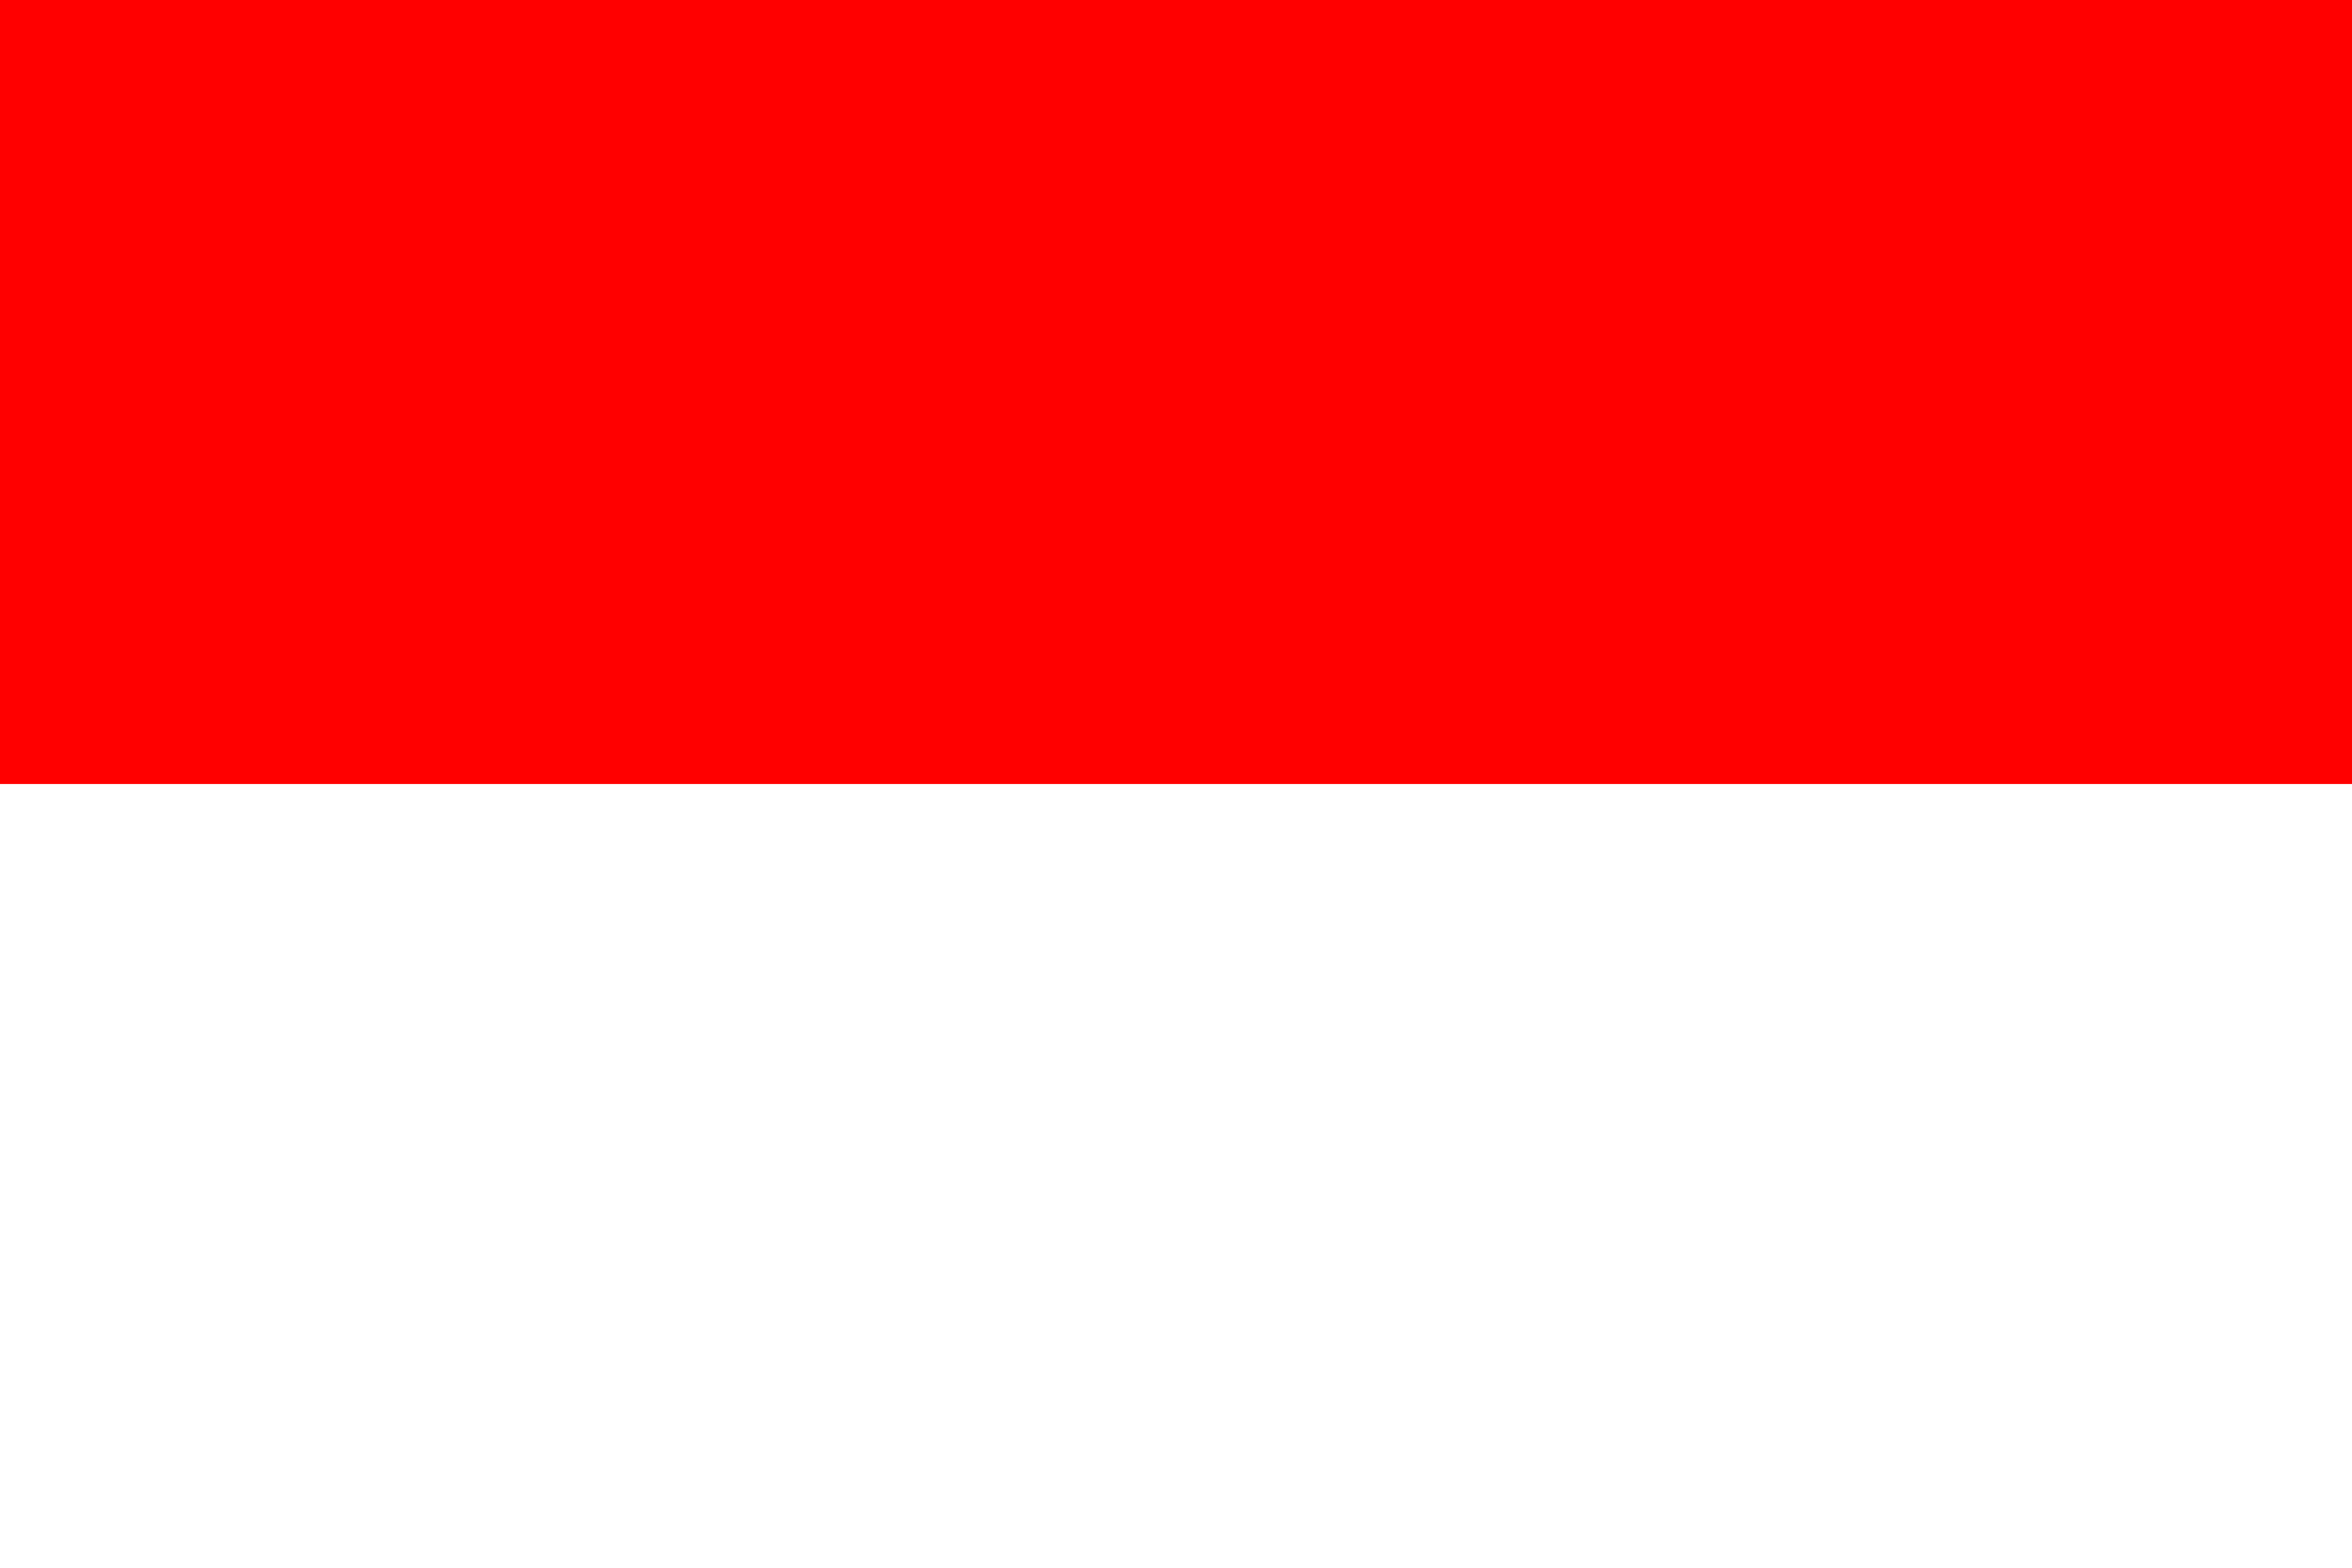 Indonesia Flag - Indonesia Drone Laws